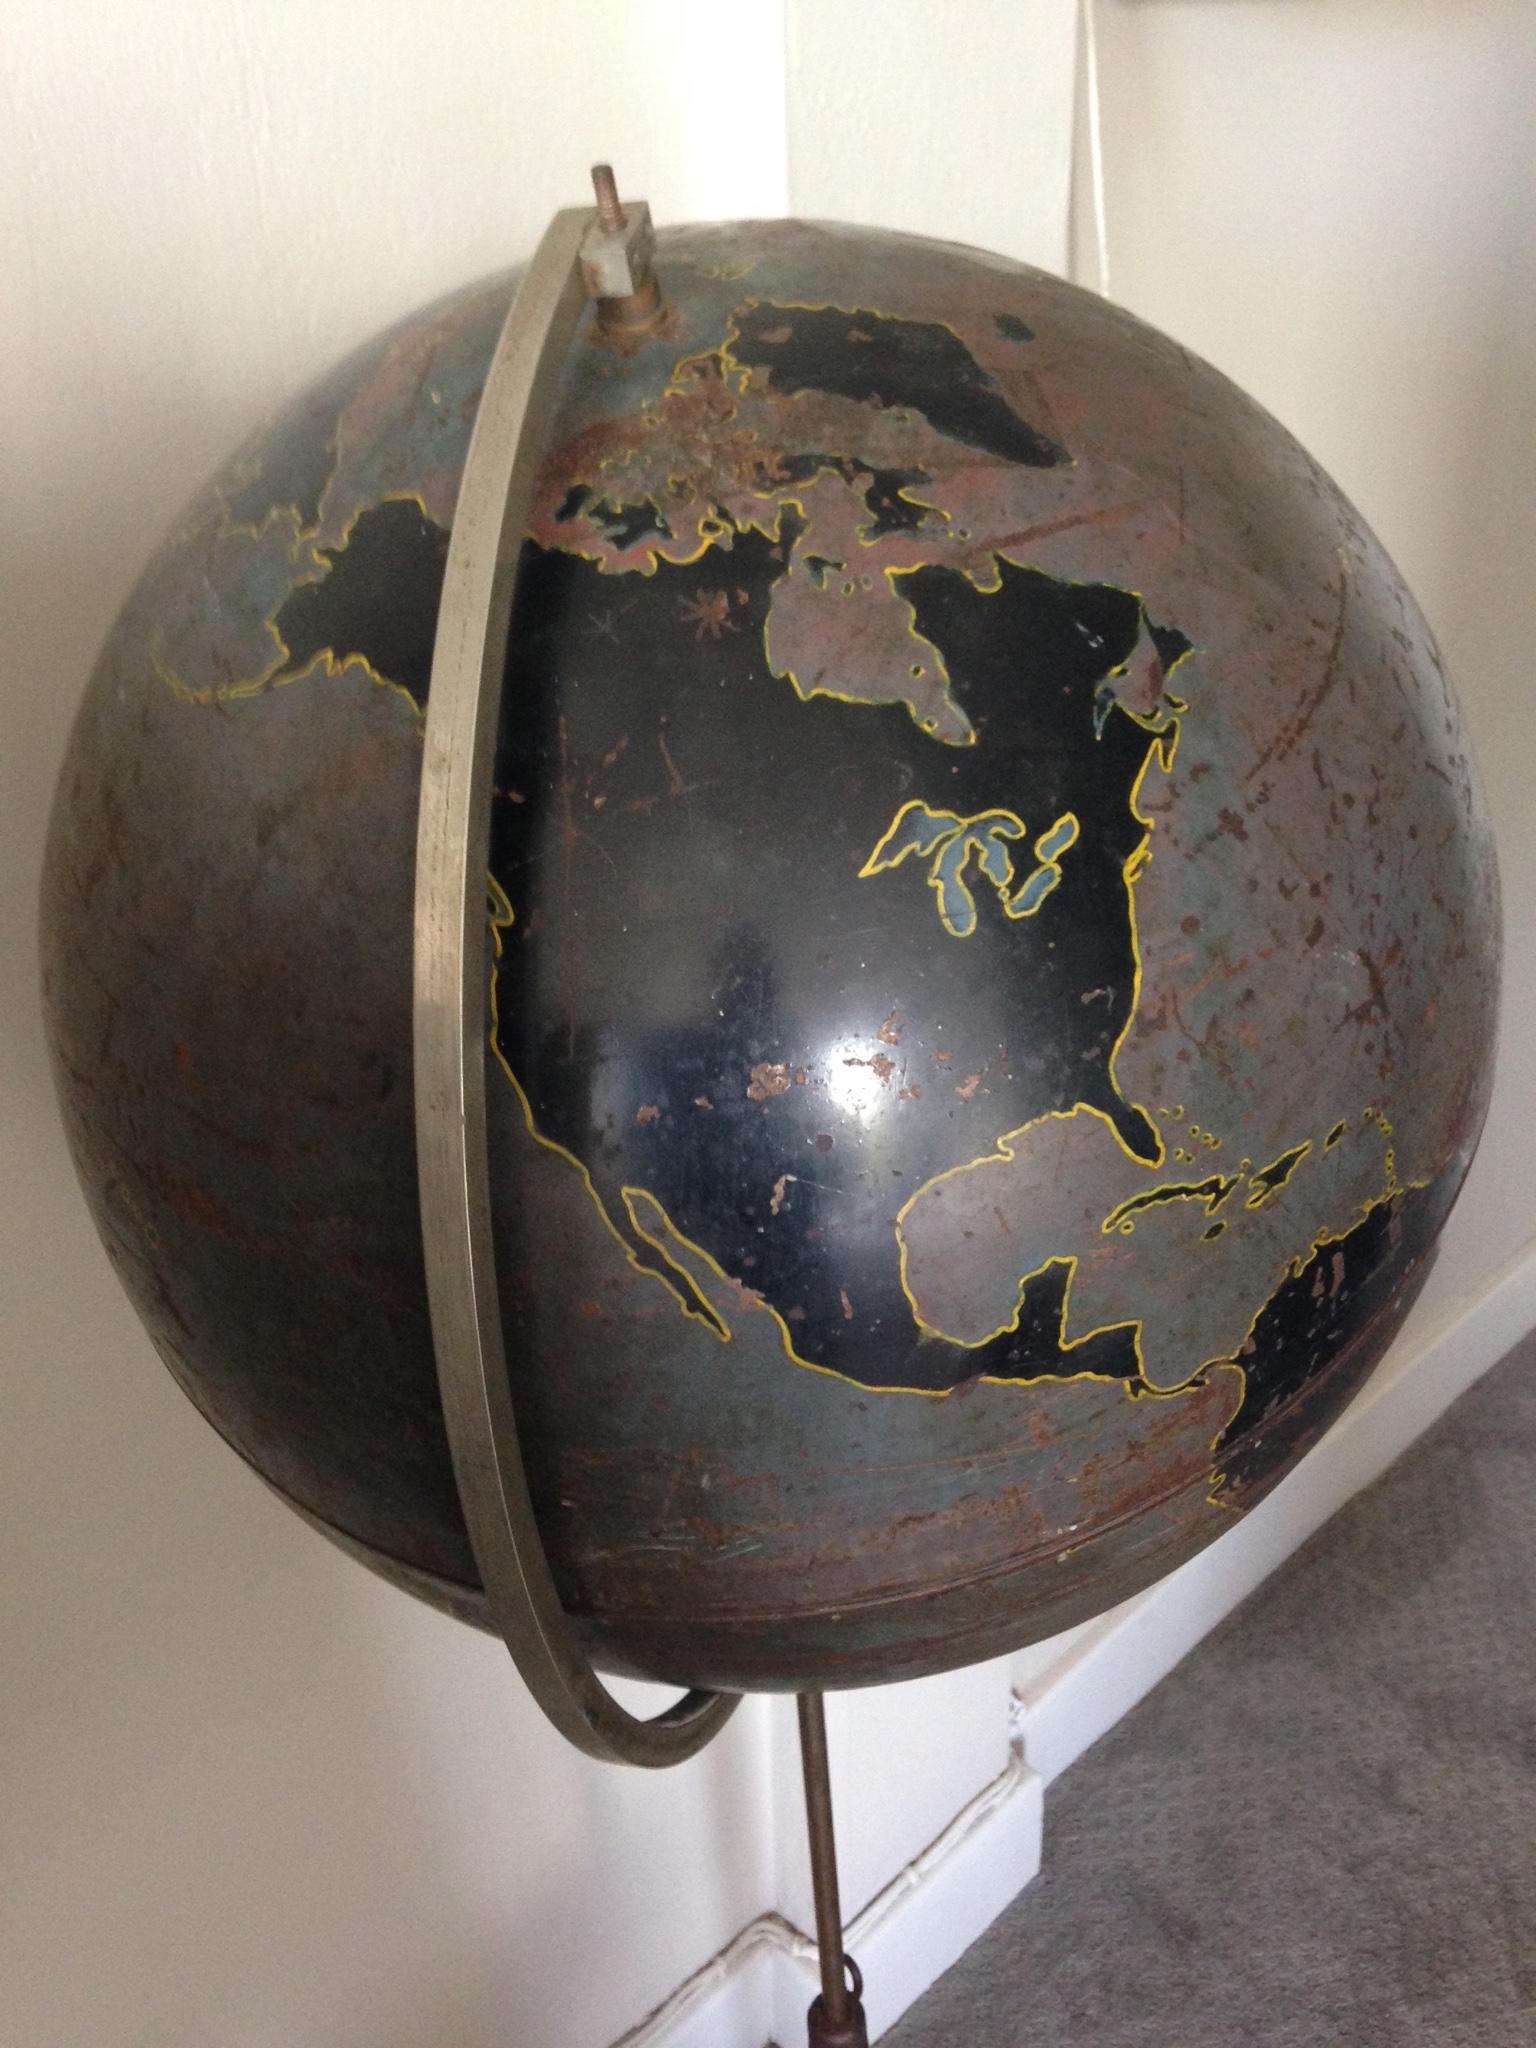 Military globe of steel with heavy, cast iron base by Denoyer Geppert, circa 1920s. Used as aviation training tool by the military, hence lack of identifying information on the land masses. Beautifully worn patina of browns and blacks mounted on